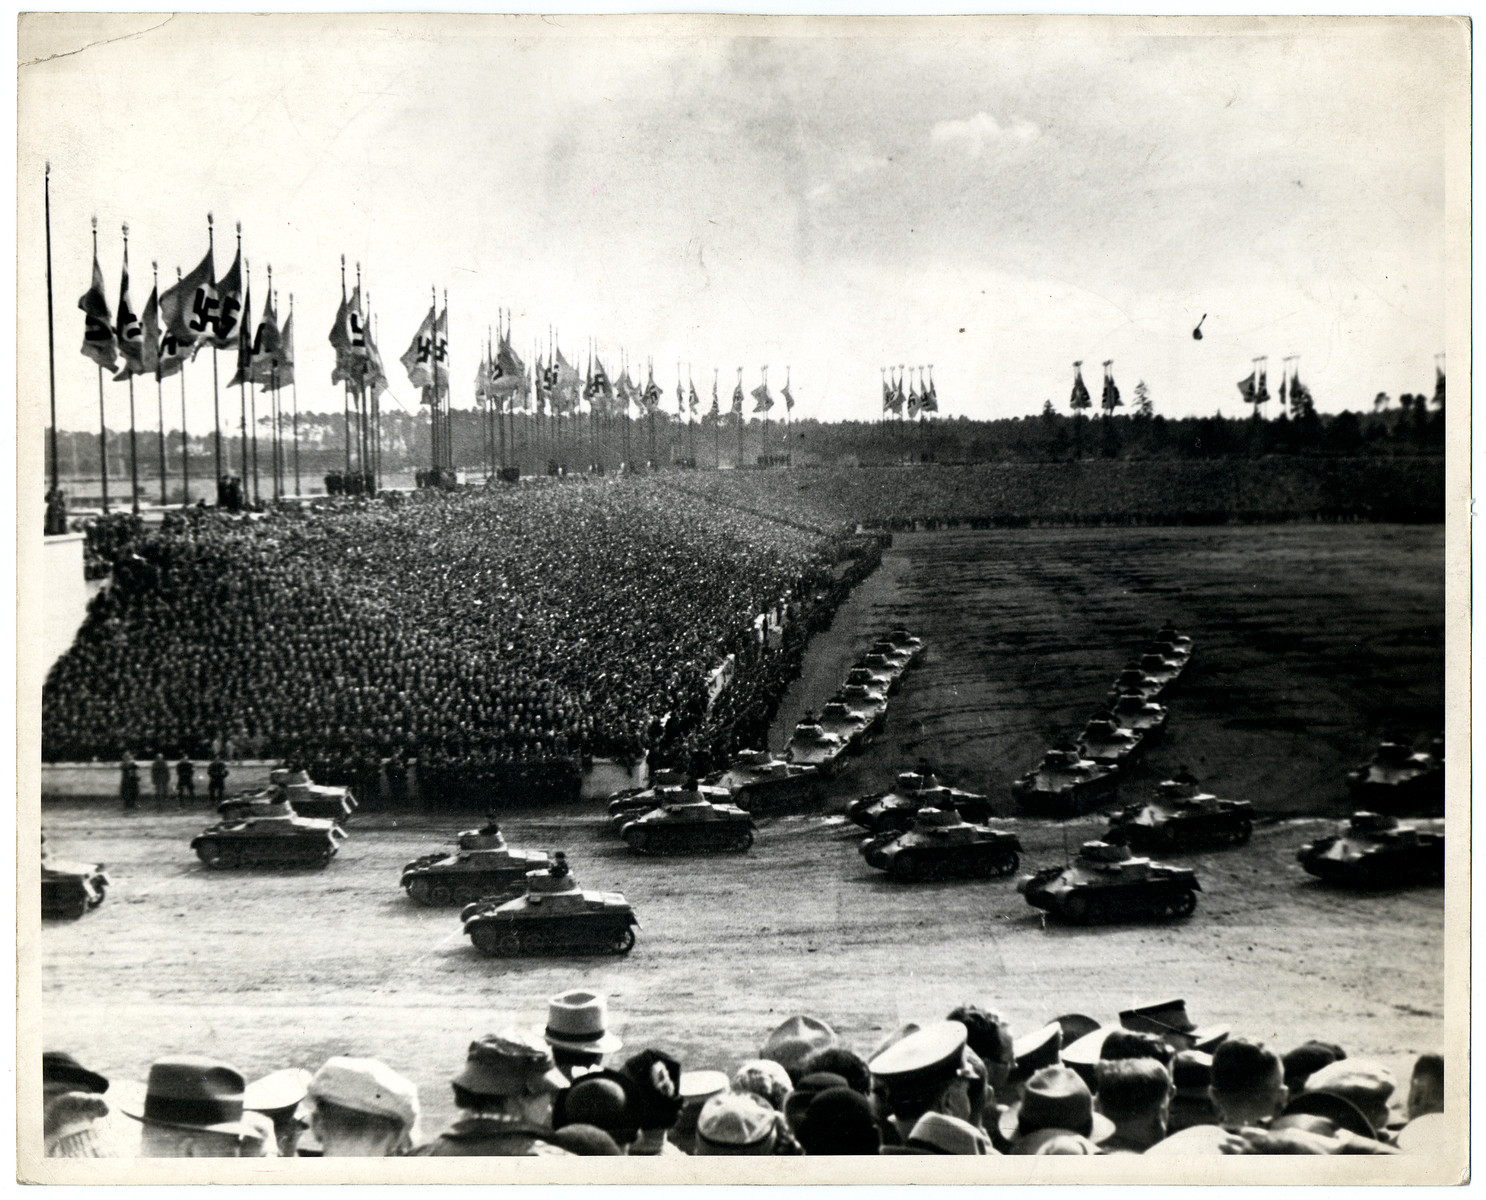 Tanks parade through the grounds of the stadium at the Nazi Party Congress in Nuremberg.